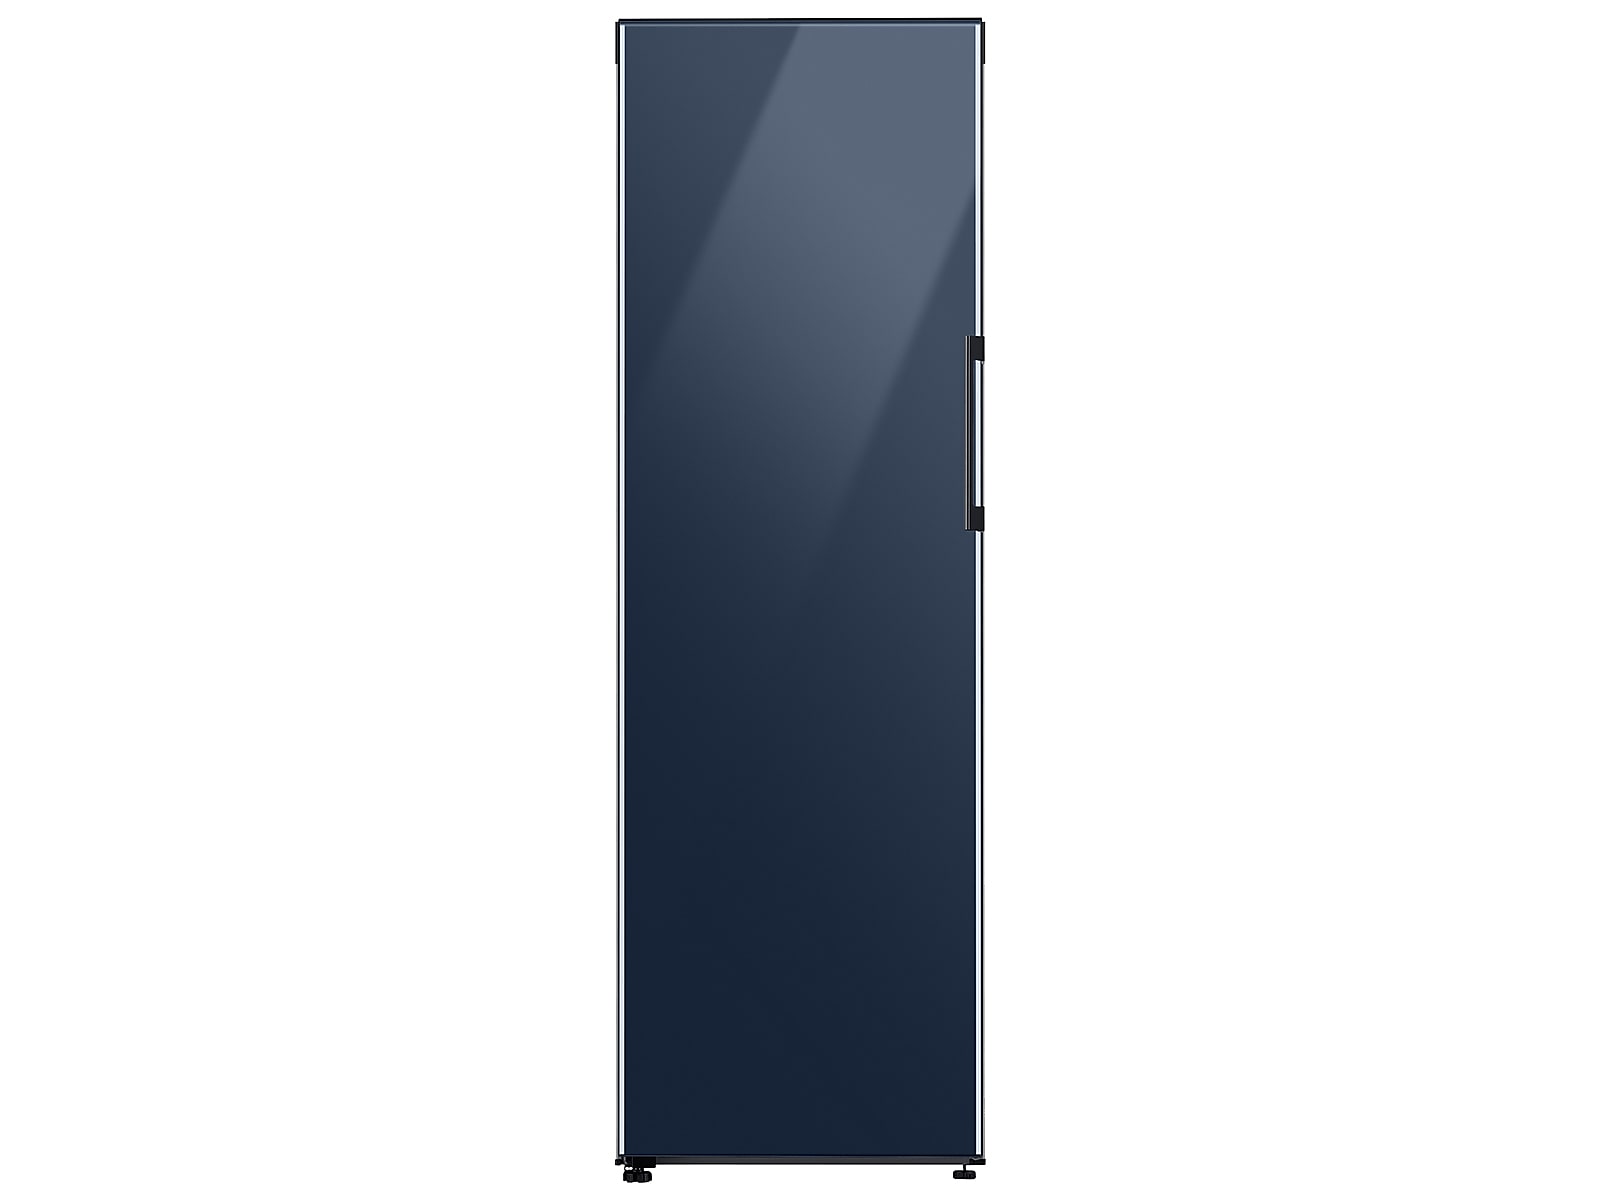 Samsung 11.4 Cu. Ft. BESPOKE Flex Column Refrigerator With Customizable Colors And Flexible Design In Navy Blue Glass(RZ11T747441/AA)